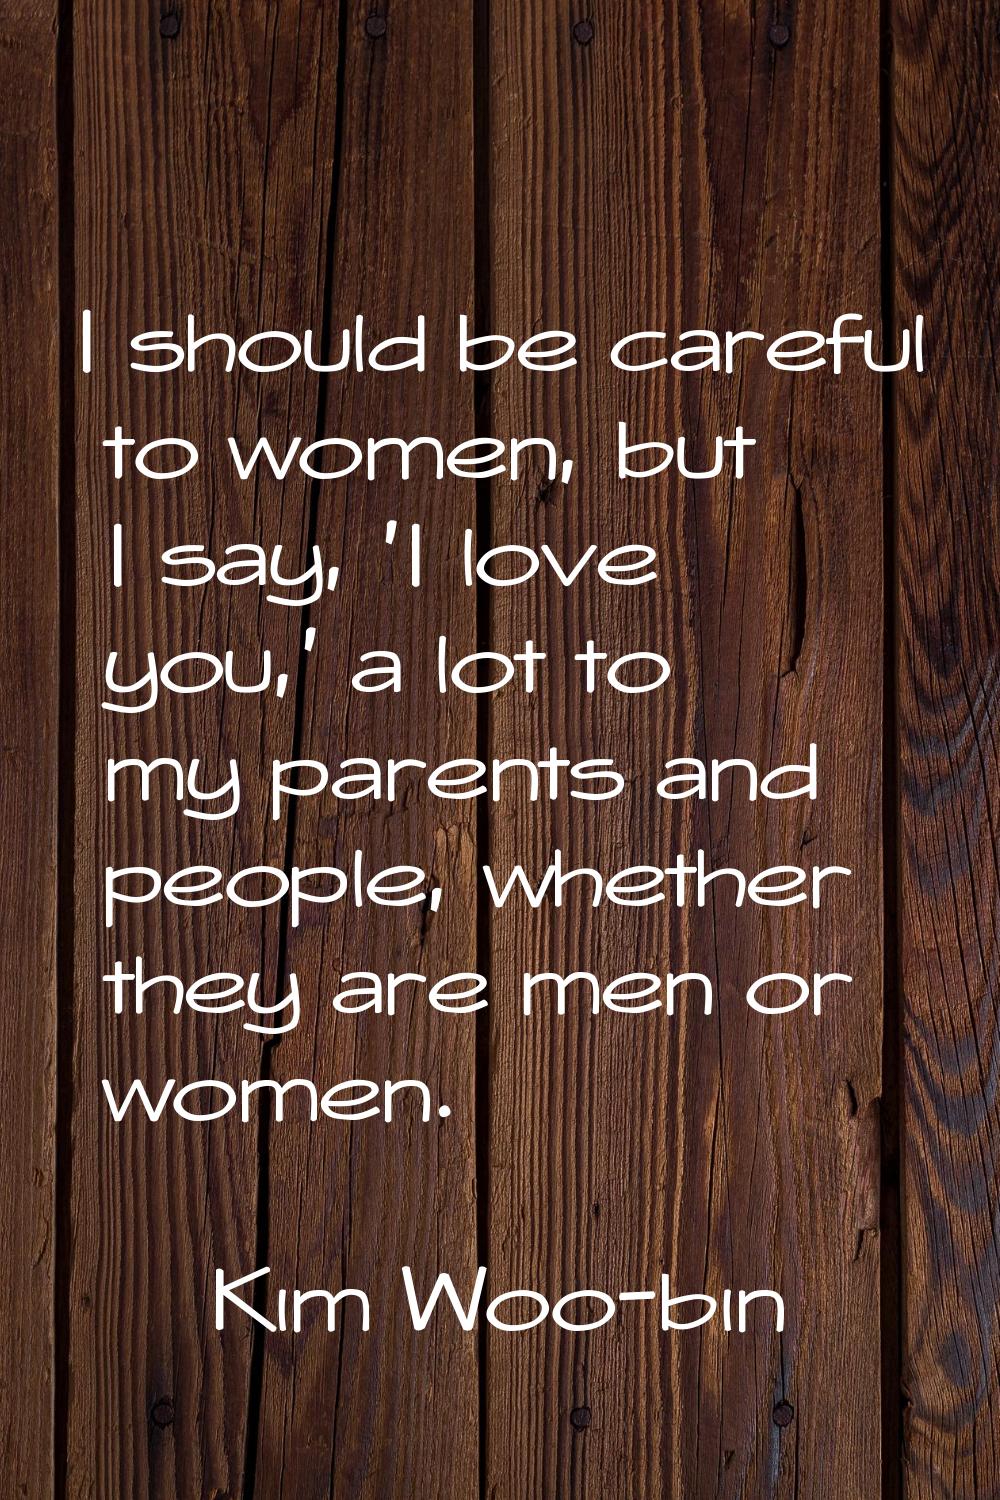 I should be careful to women, but I say, 'I love you,' a lot to my parents and people, whether they